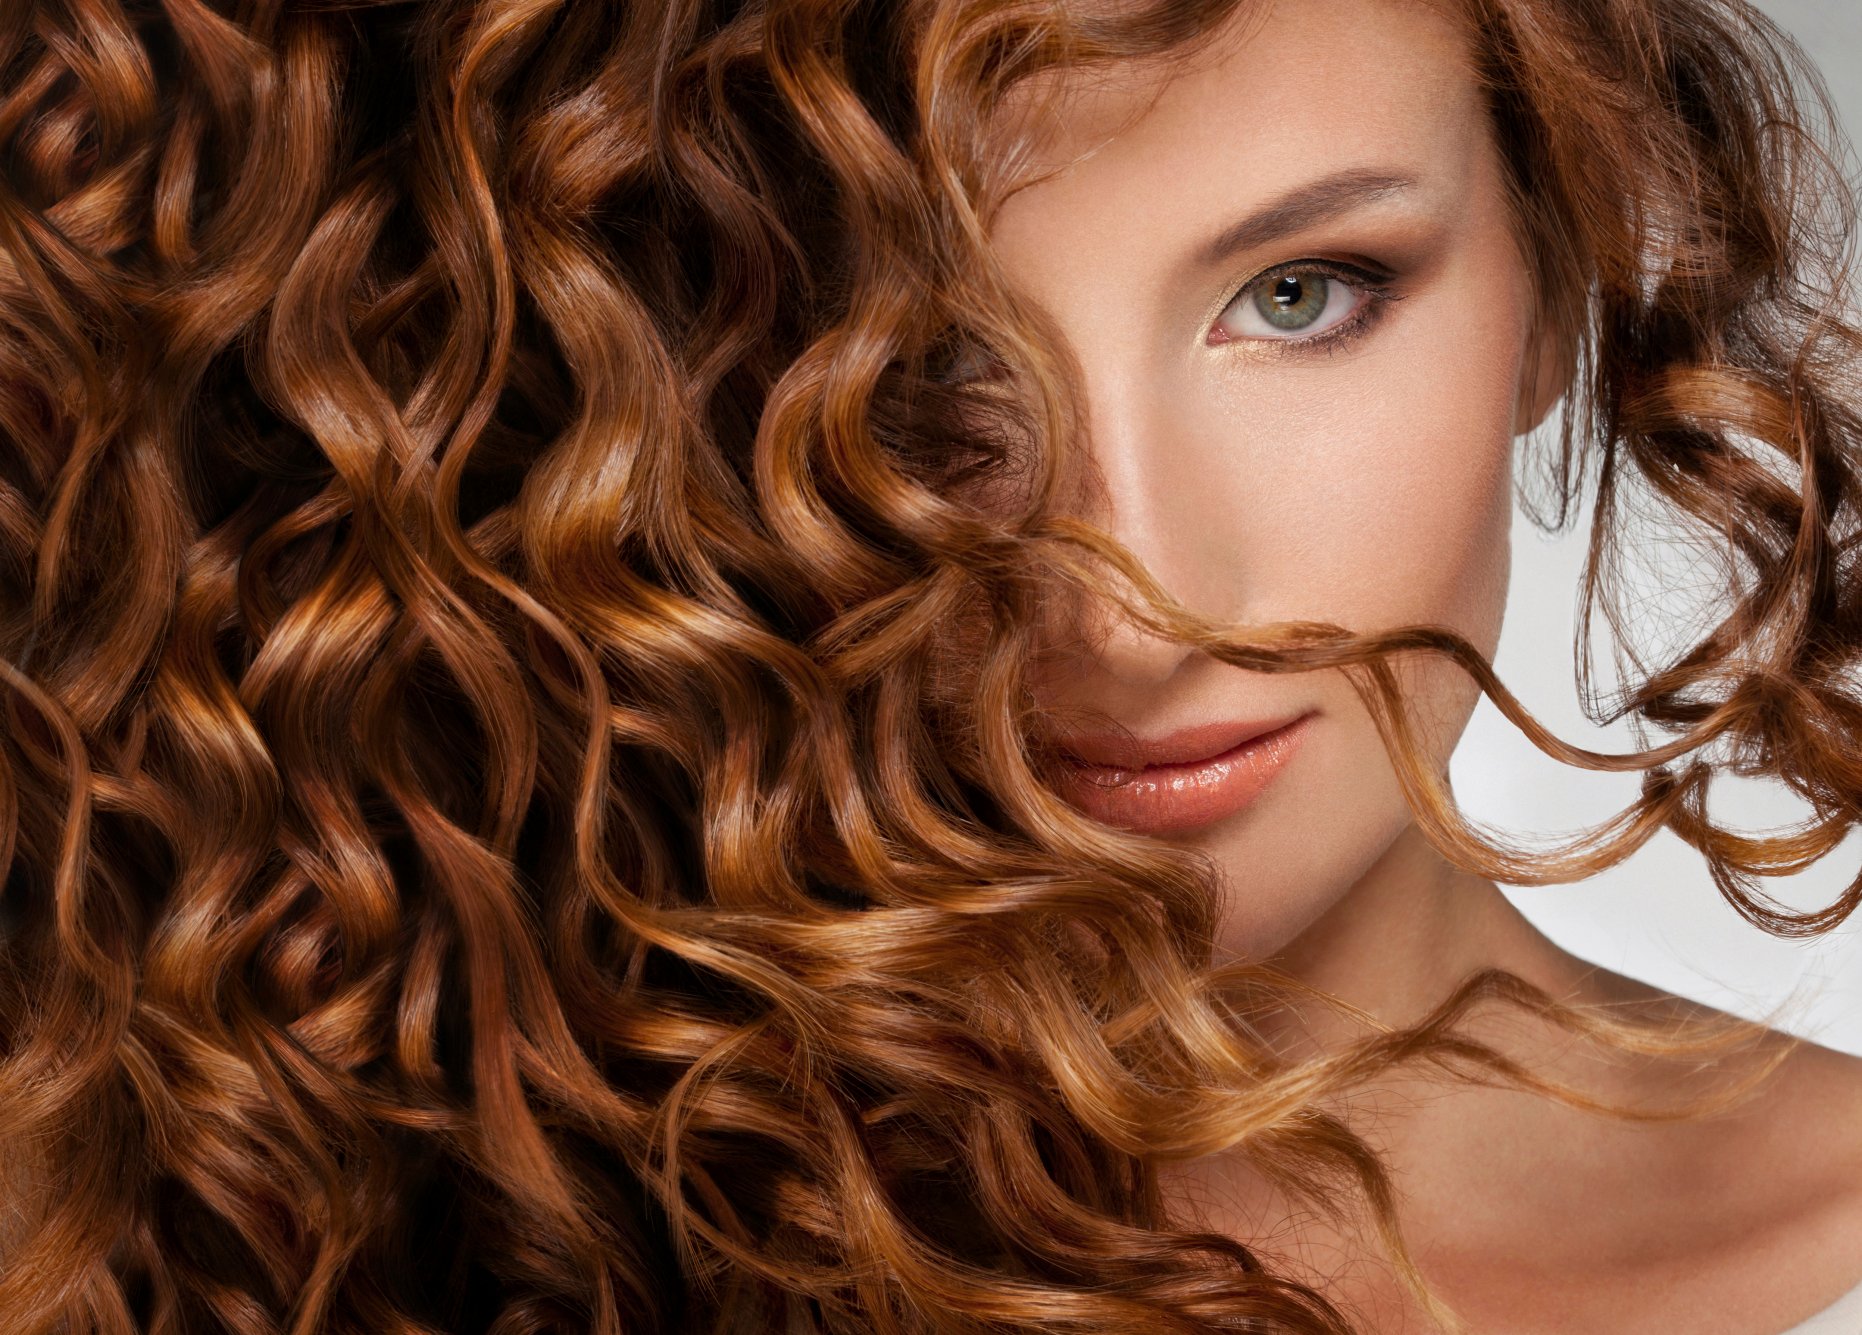 About permanent waves - Women Fitness